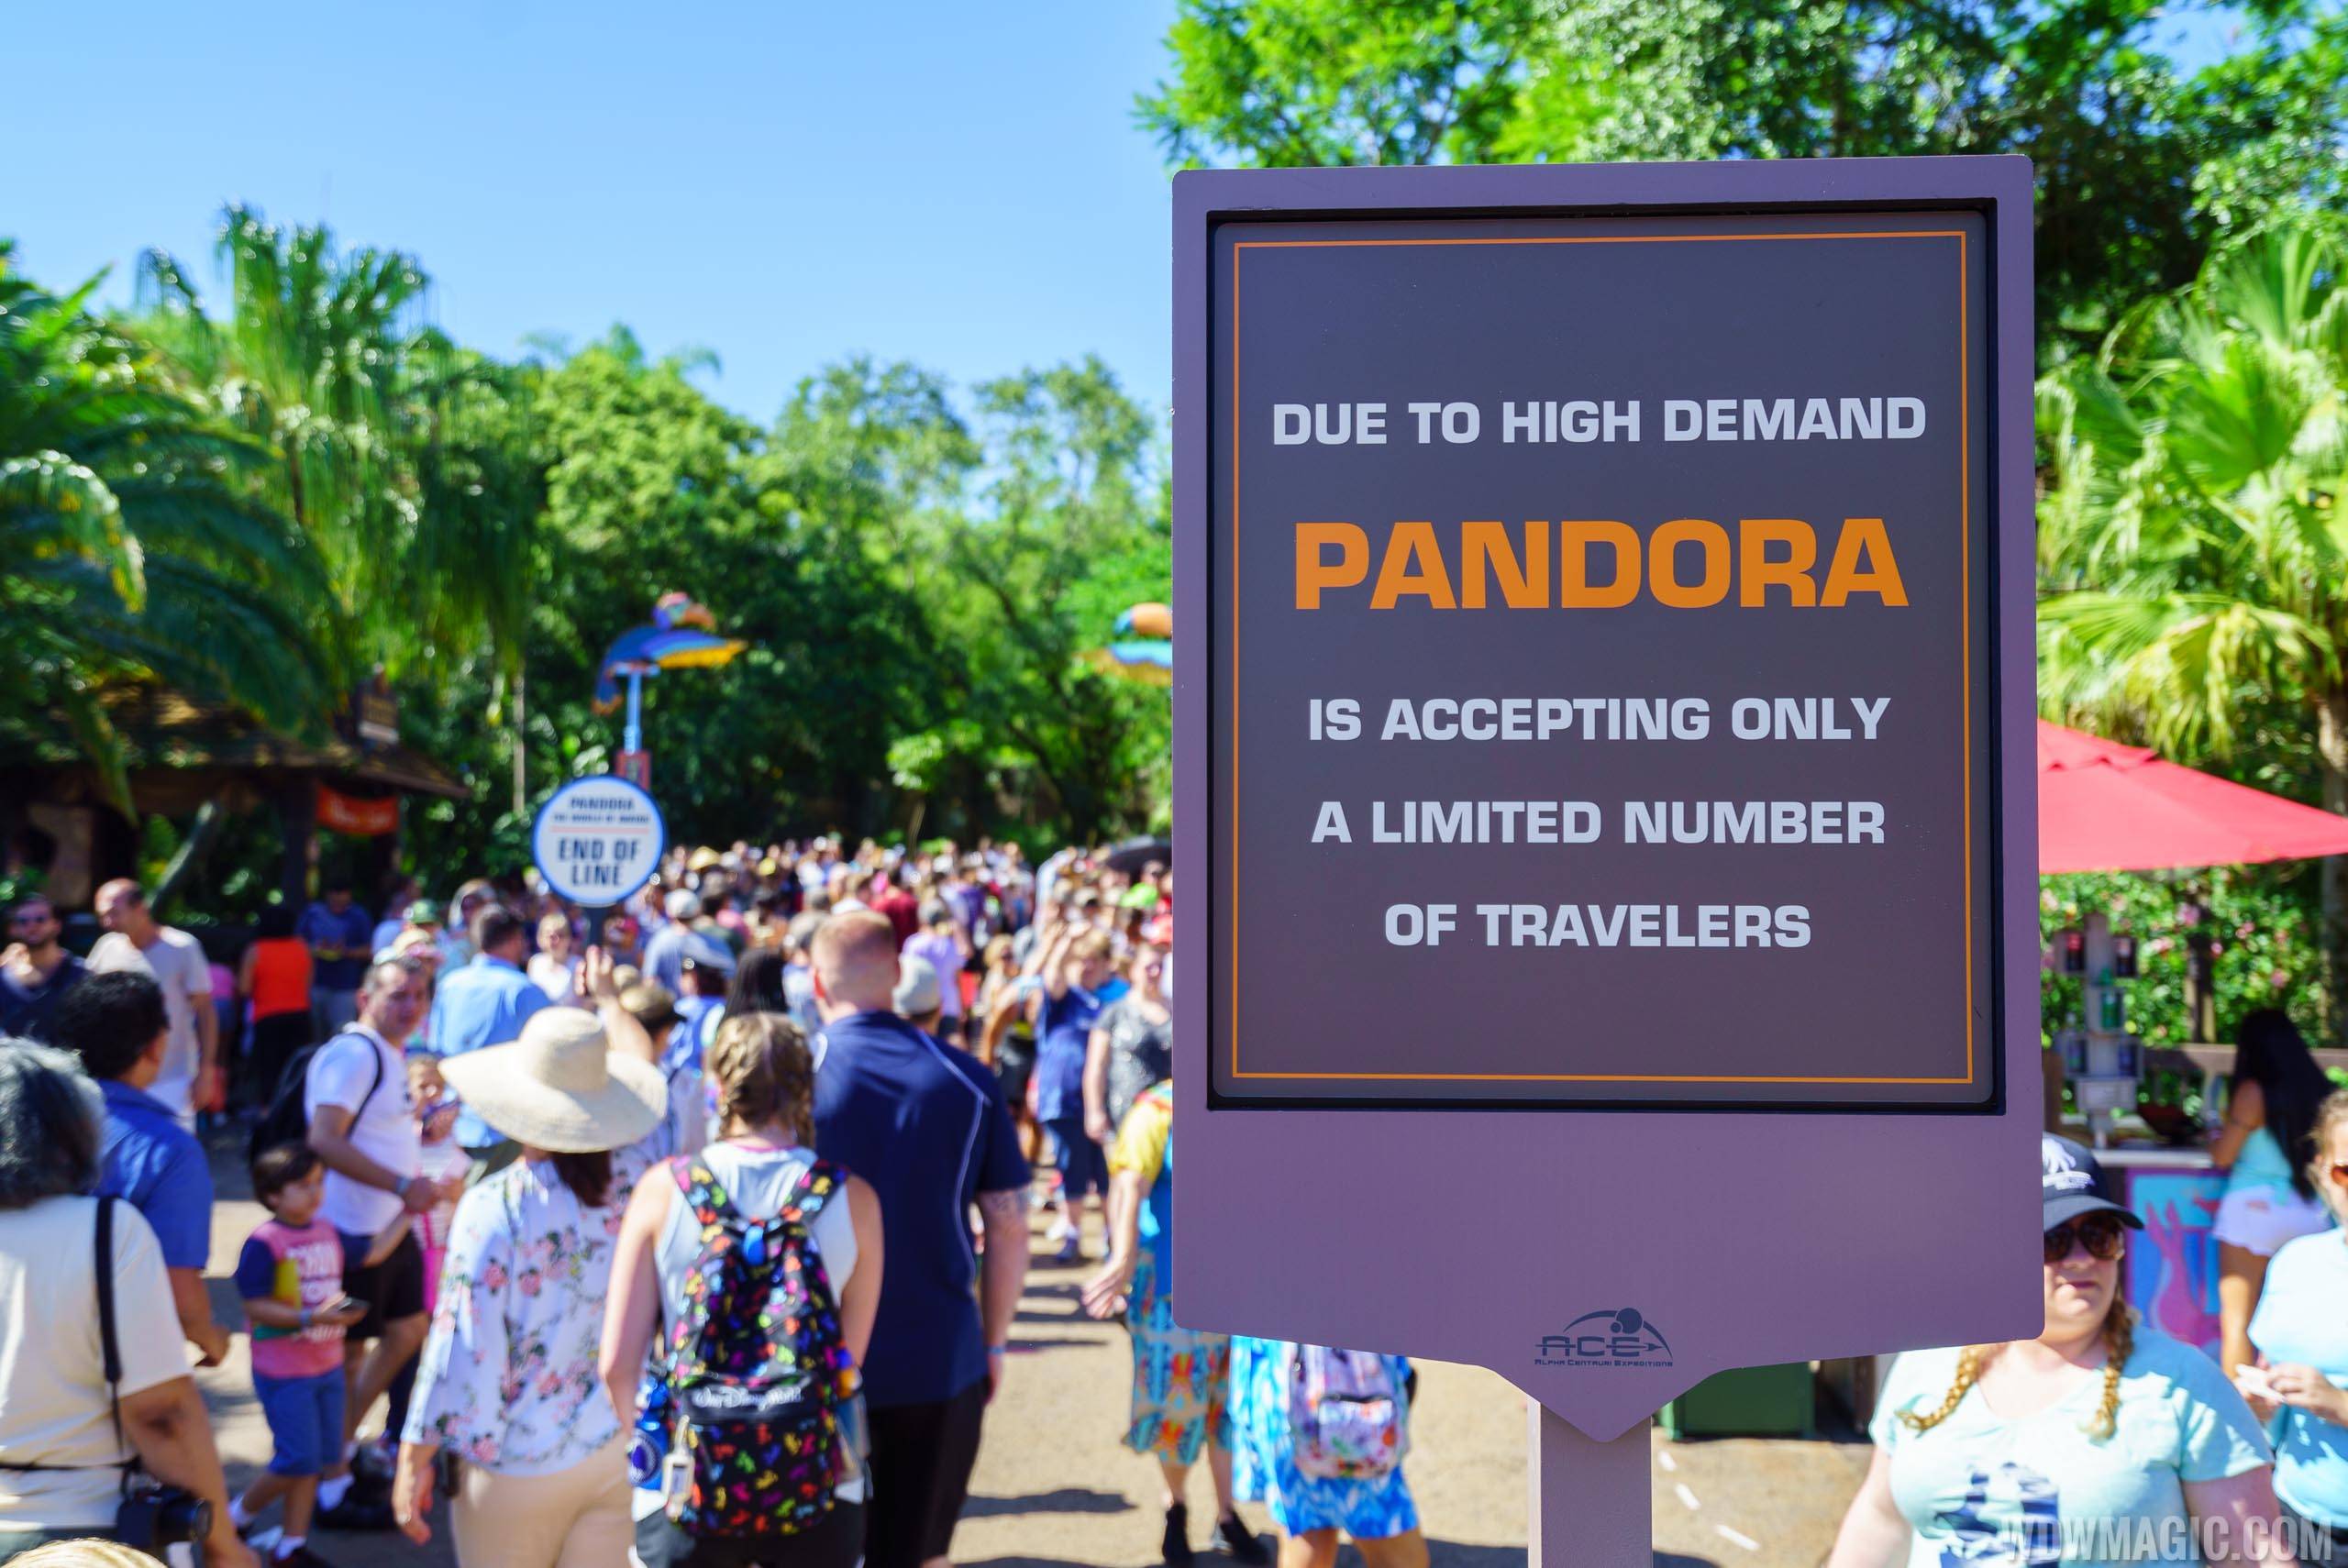 PHOTOS and VIDEO - A look at opening day crowds for Pandora - The World of Avatar